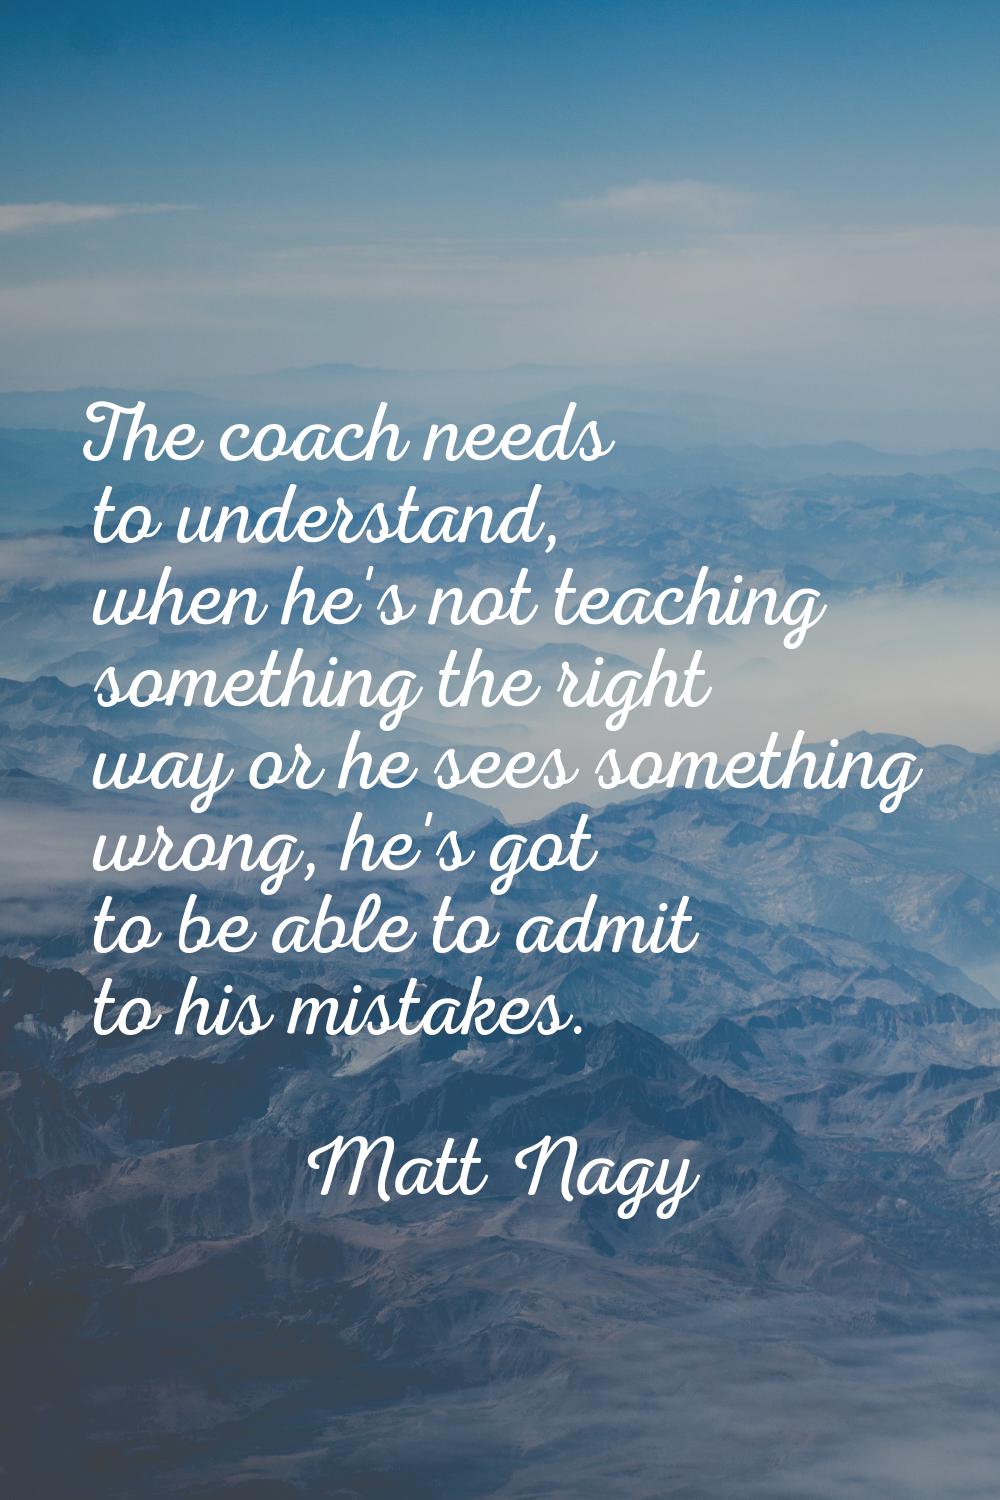 The coach needs to understand, when he's not teaching something the right way or he sees something 